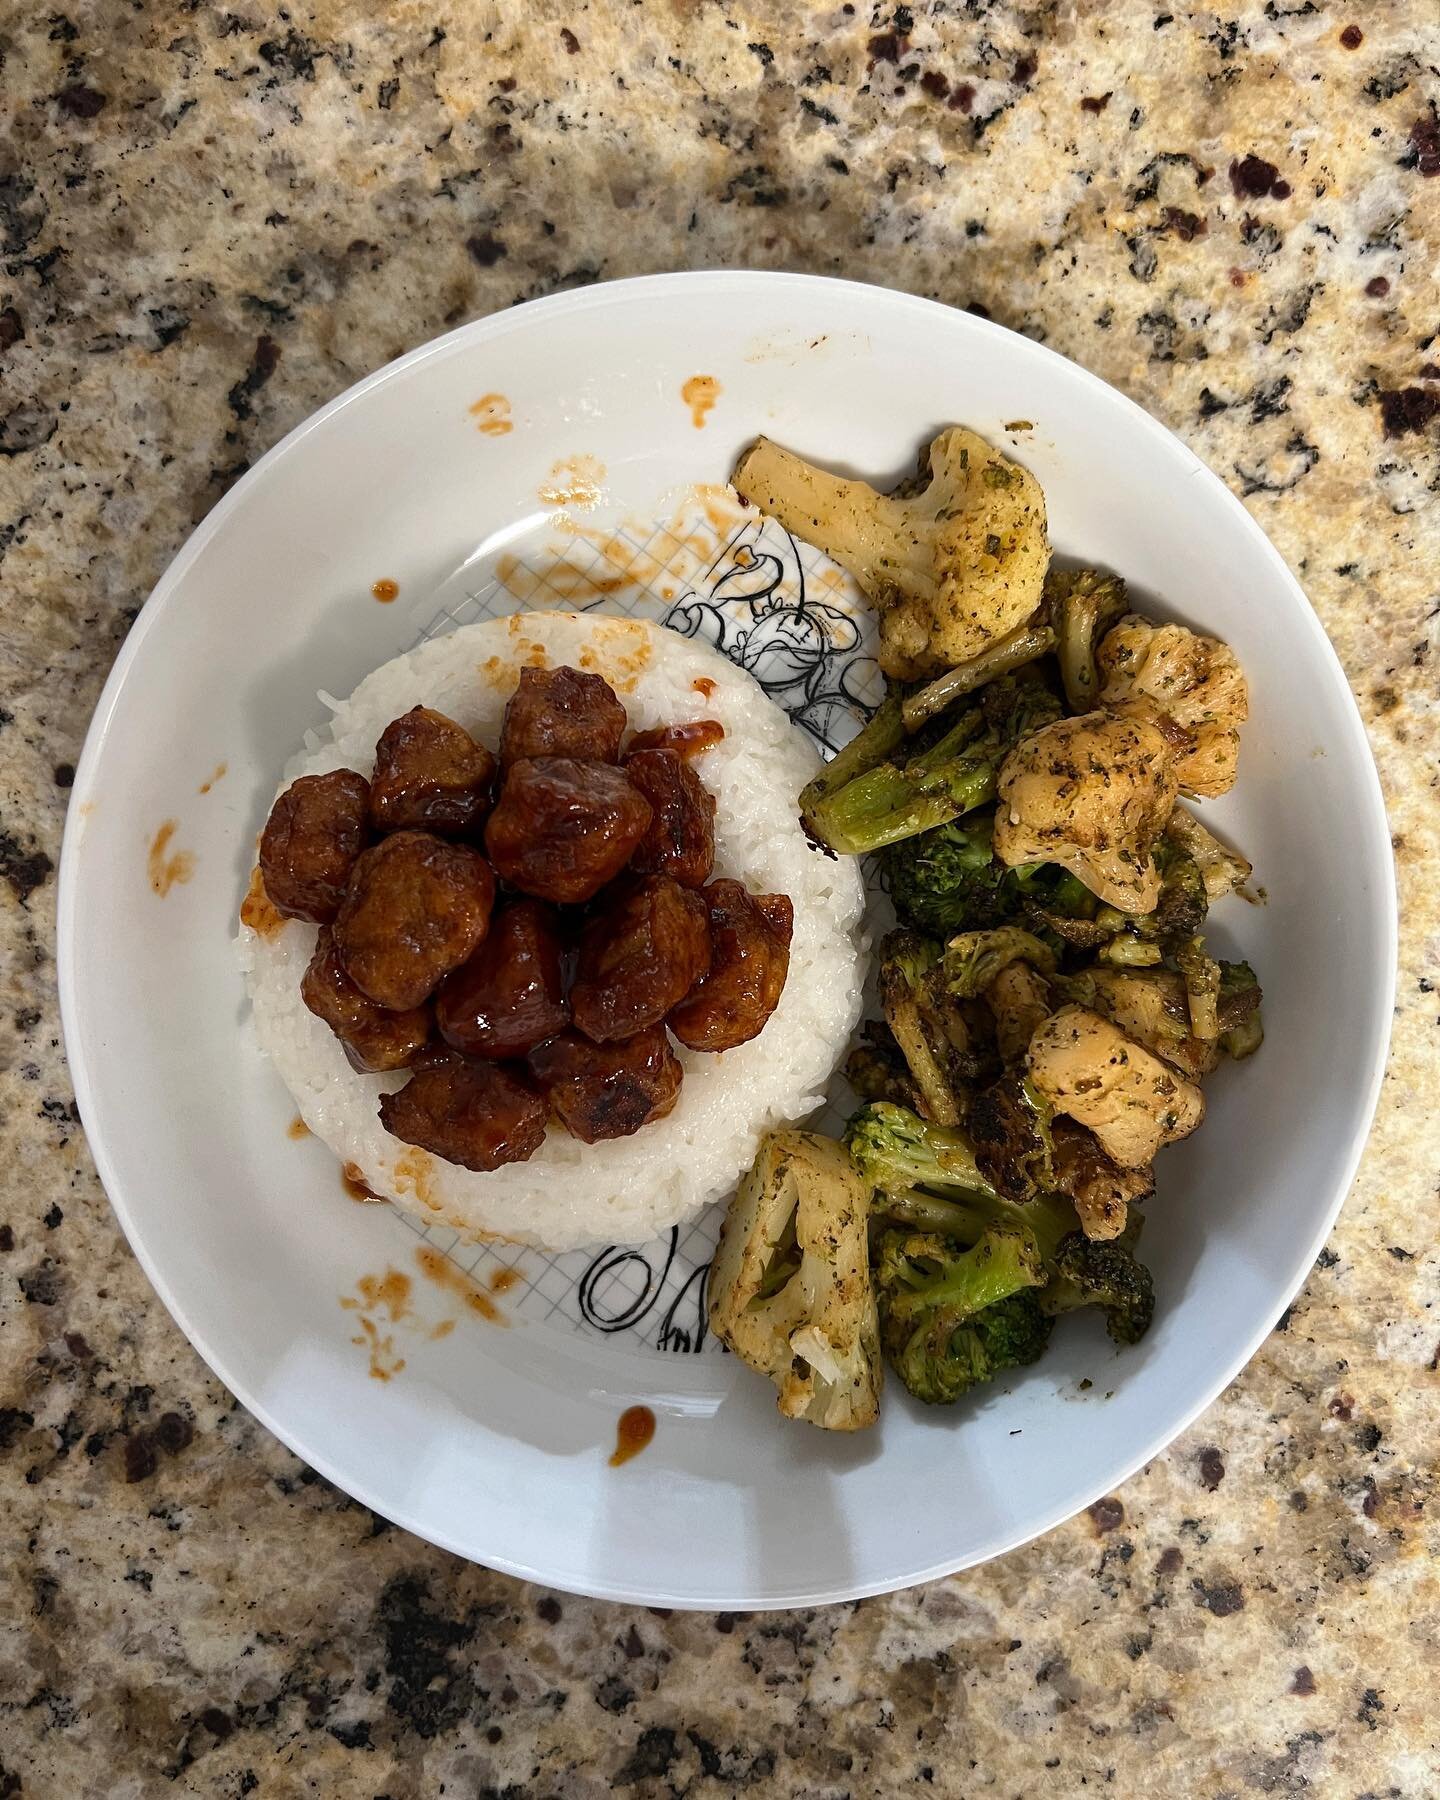 Sweet and sour porkless bites over sticky white rice with a side of roasted broccoli and cauliflower!